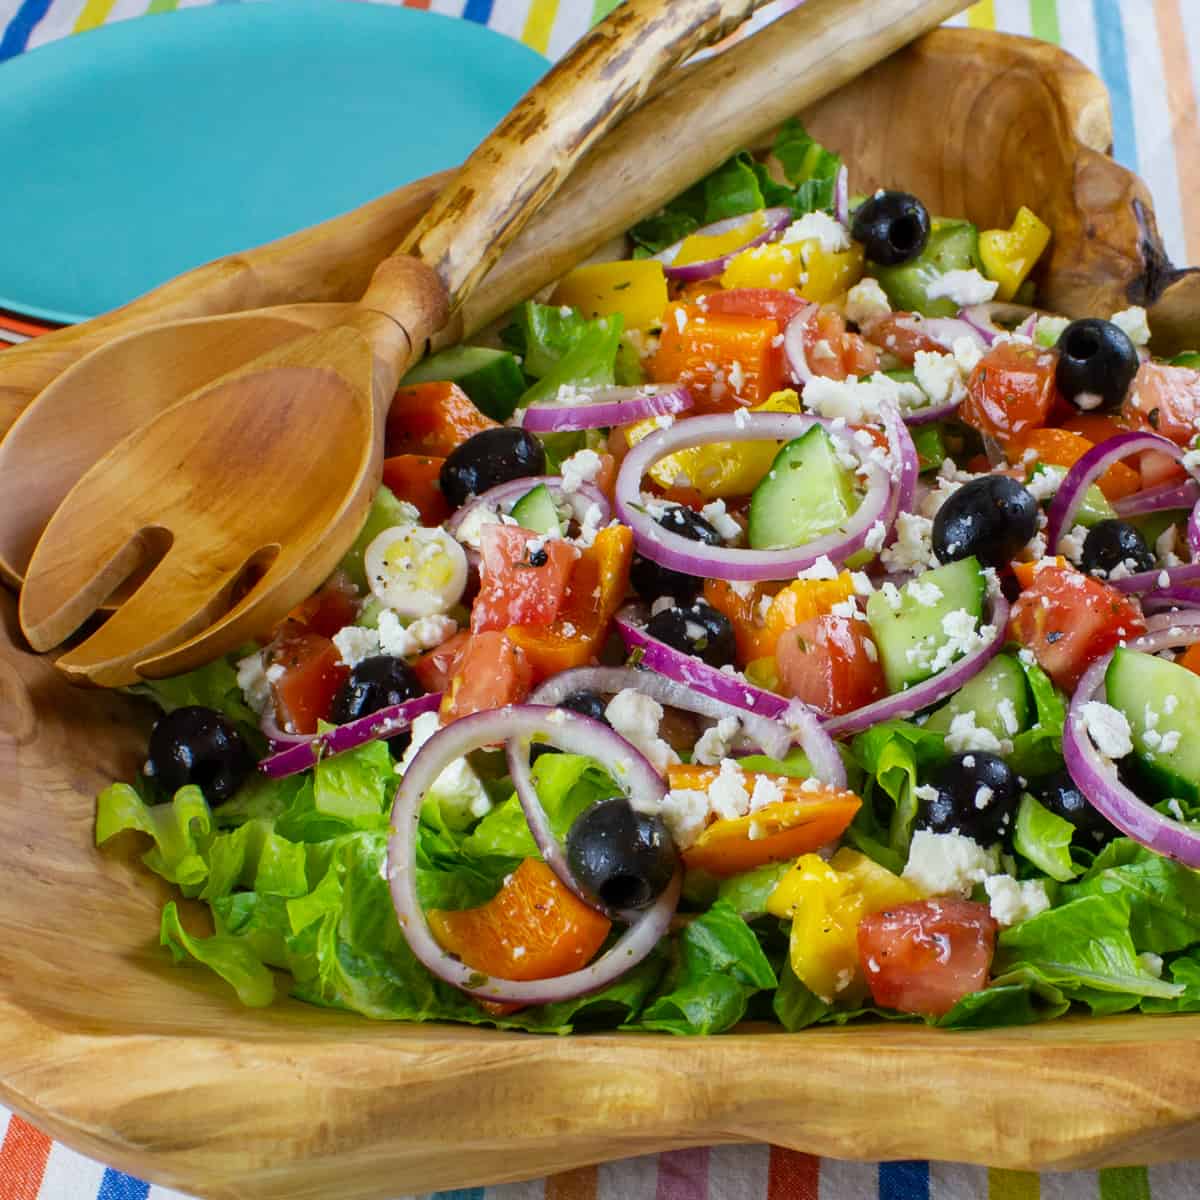 Wooden tongs crossed on top of a salad.